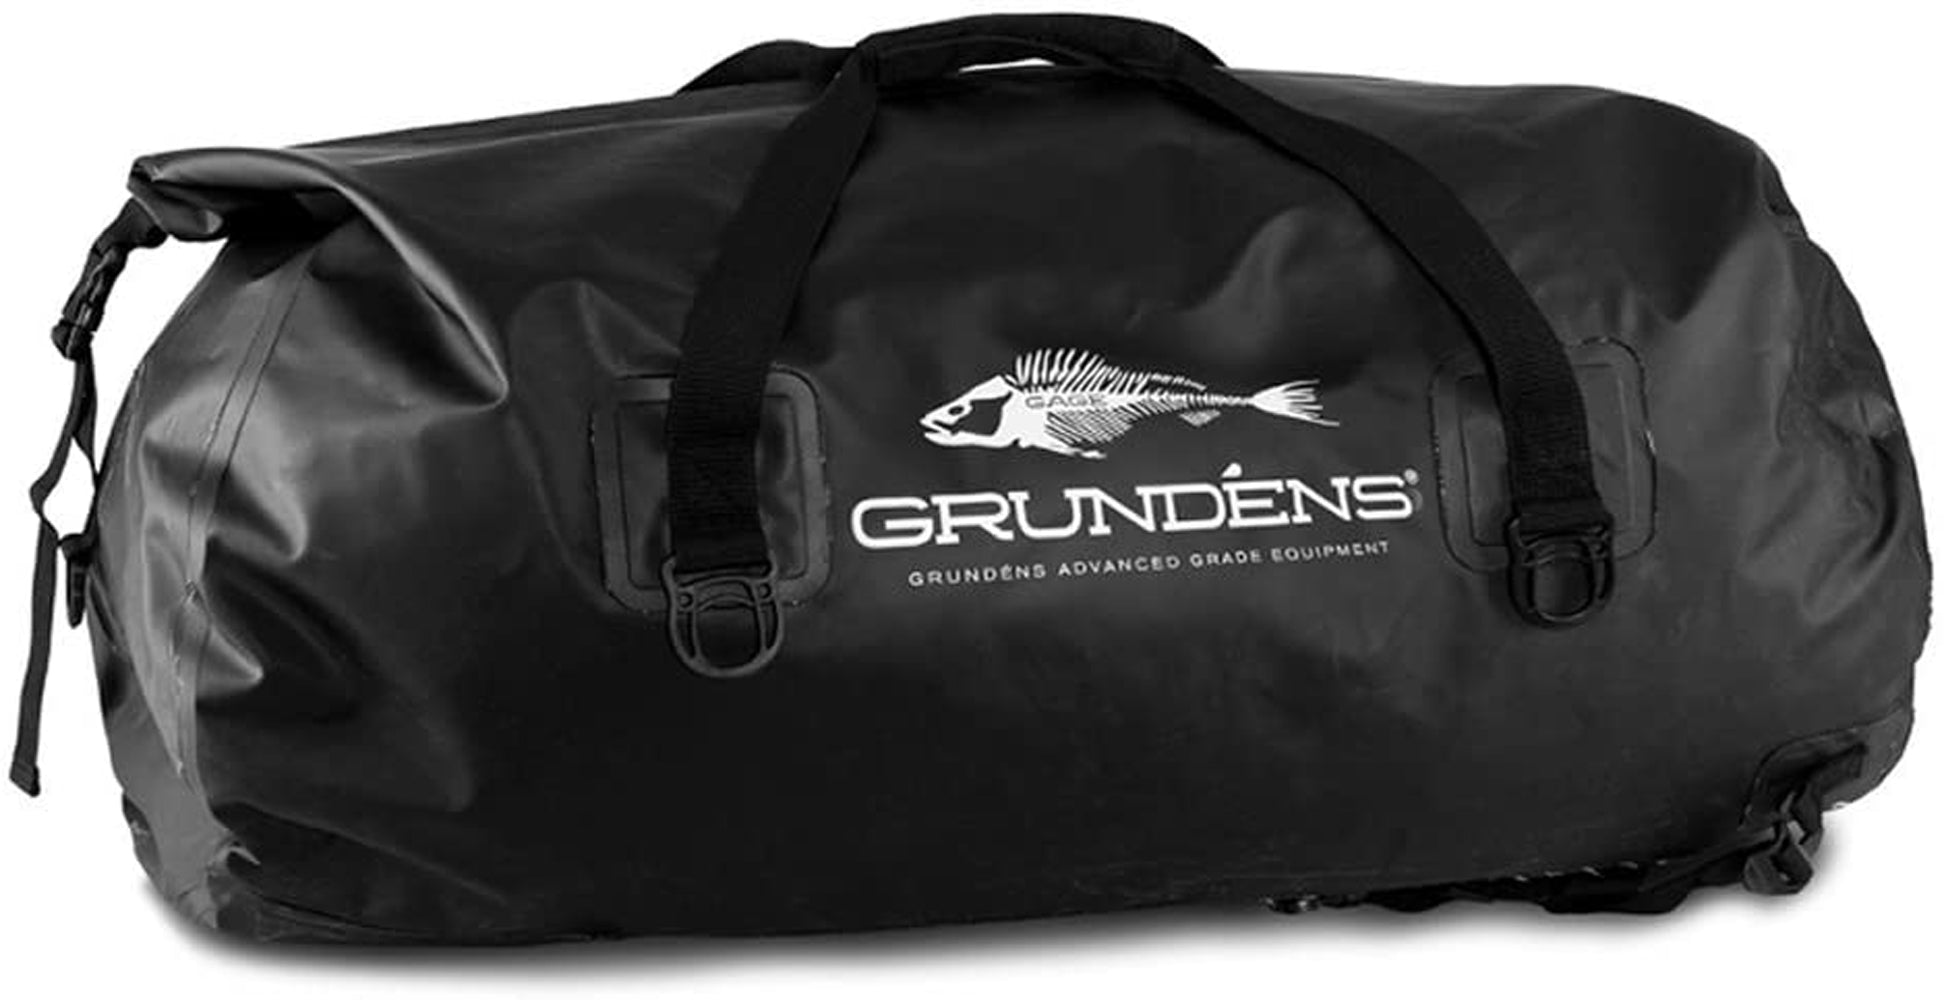 Shackelton 105L Duffel Bag in Black color from the front view